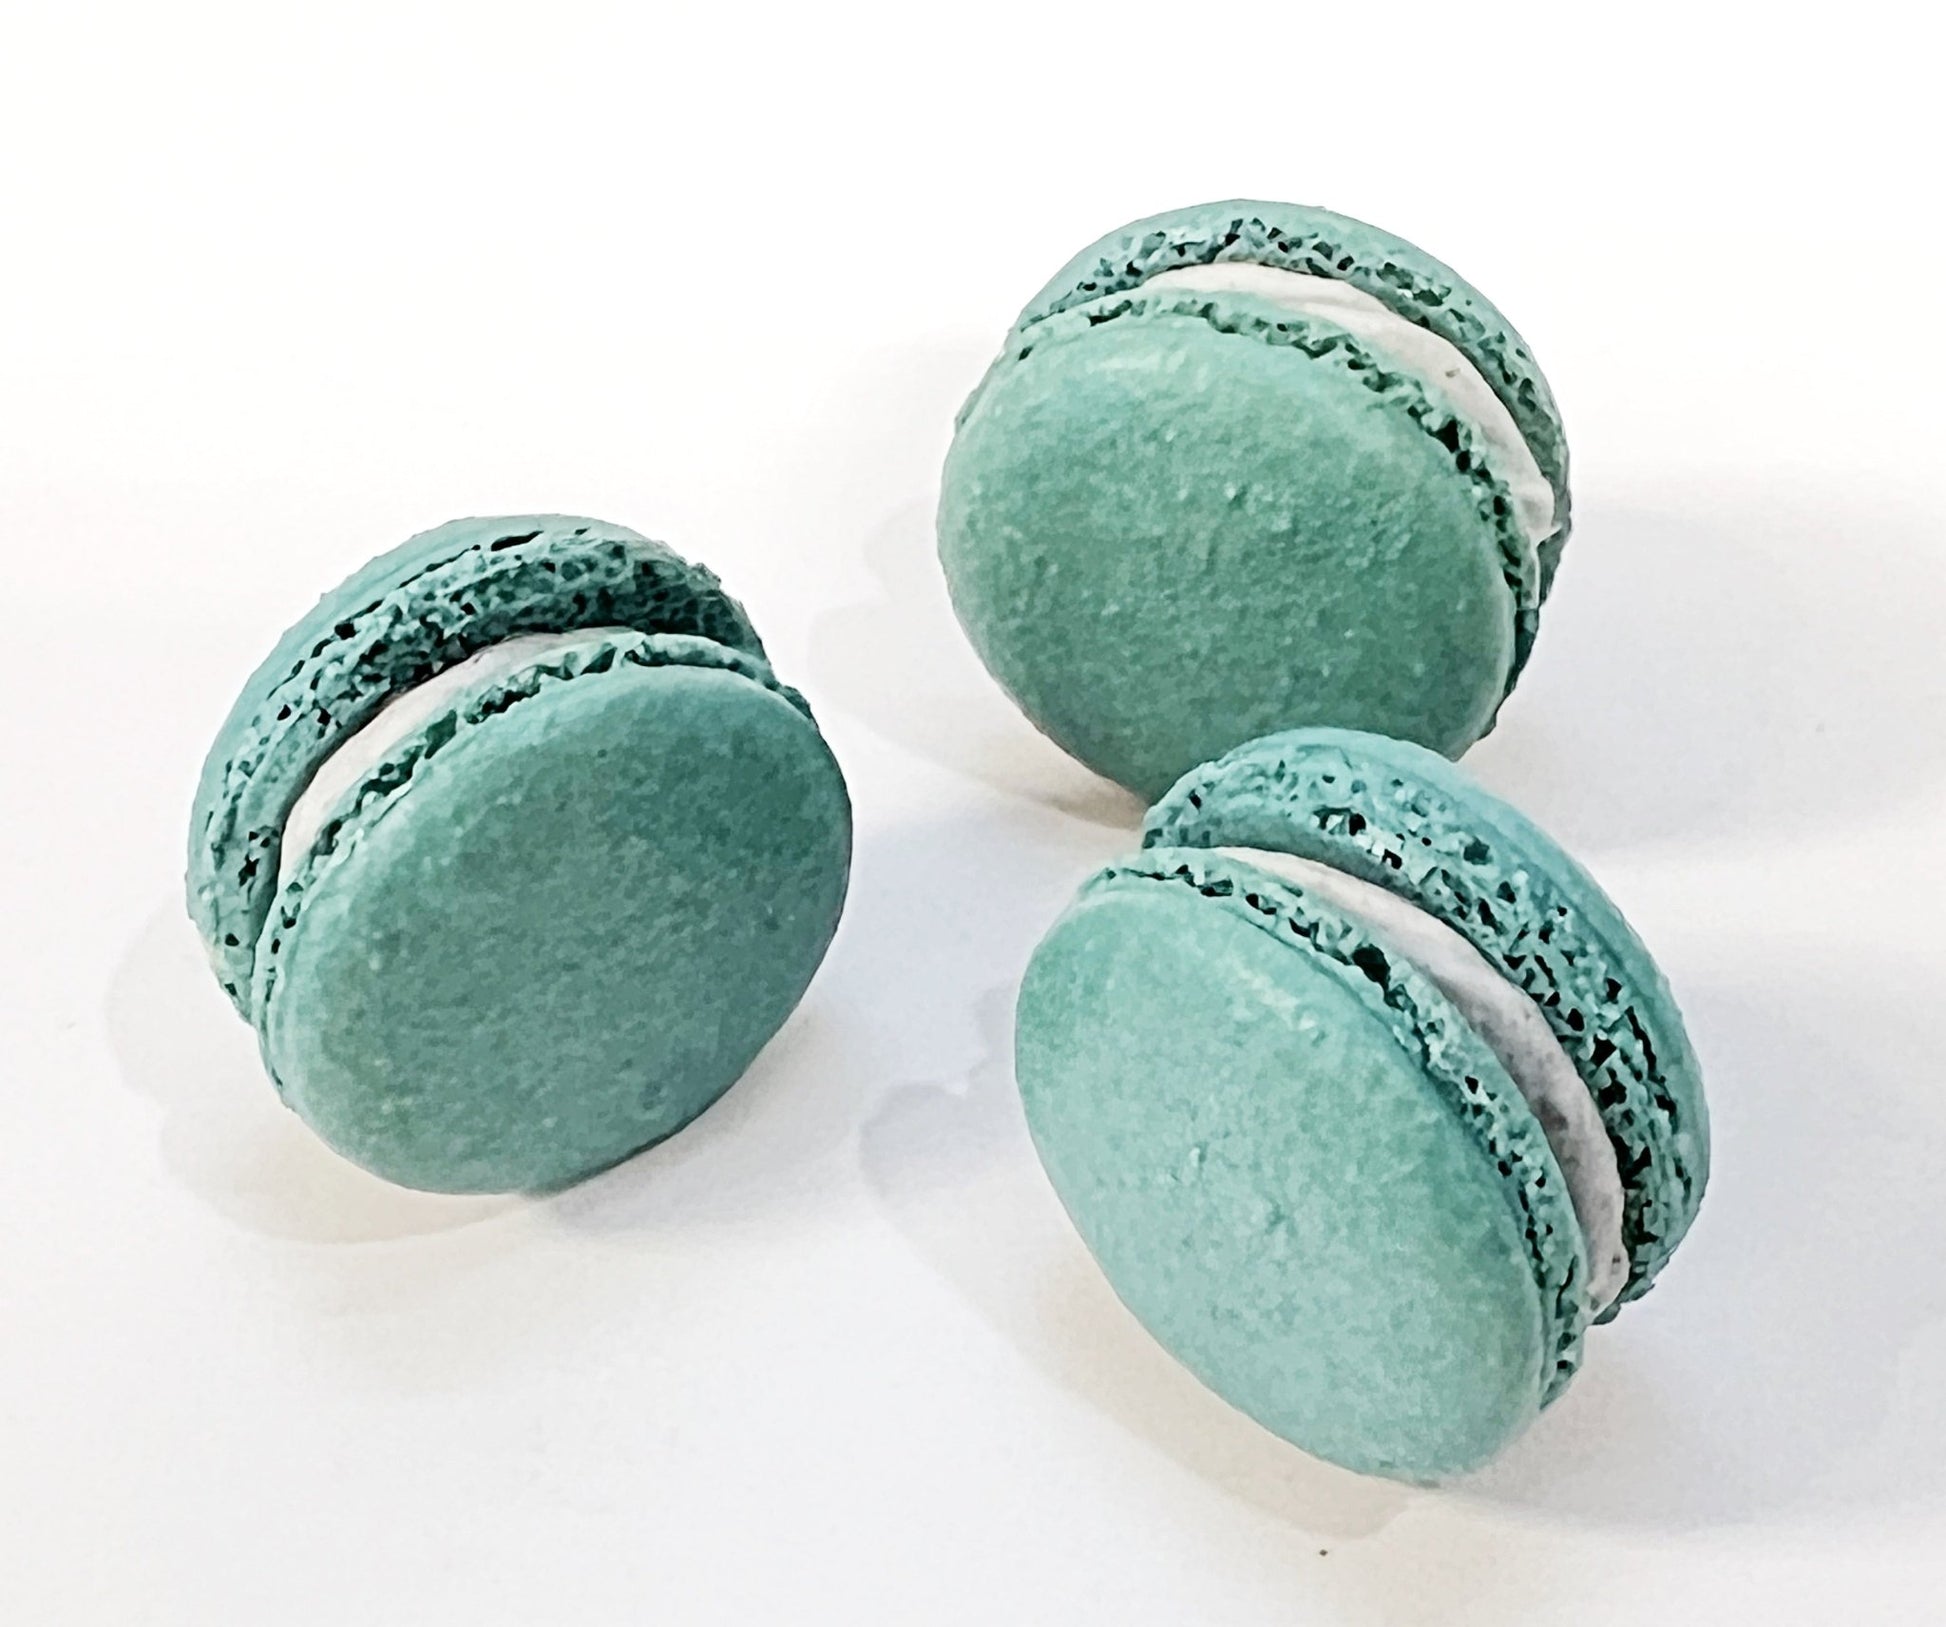 Blackberry Lavender French Macarons | Perfect for your next holiday feast. - Macaron Centrale